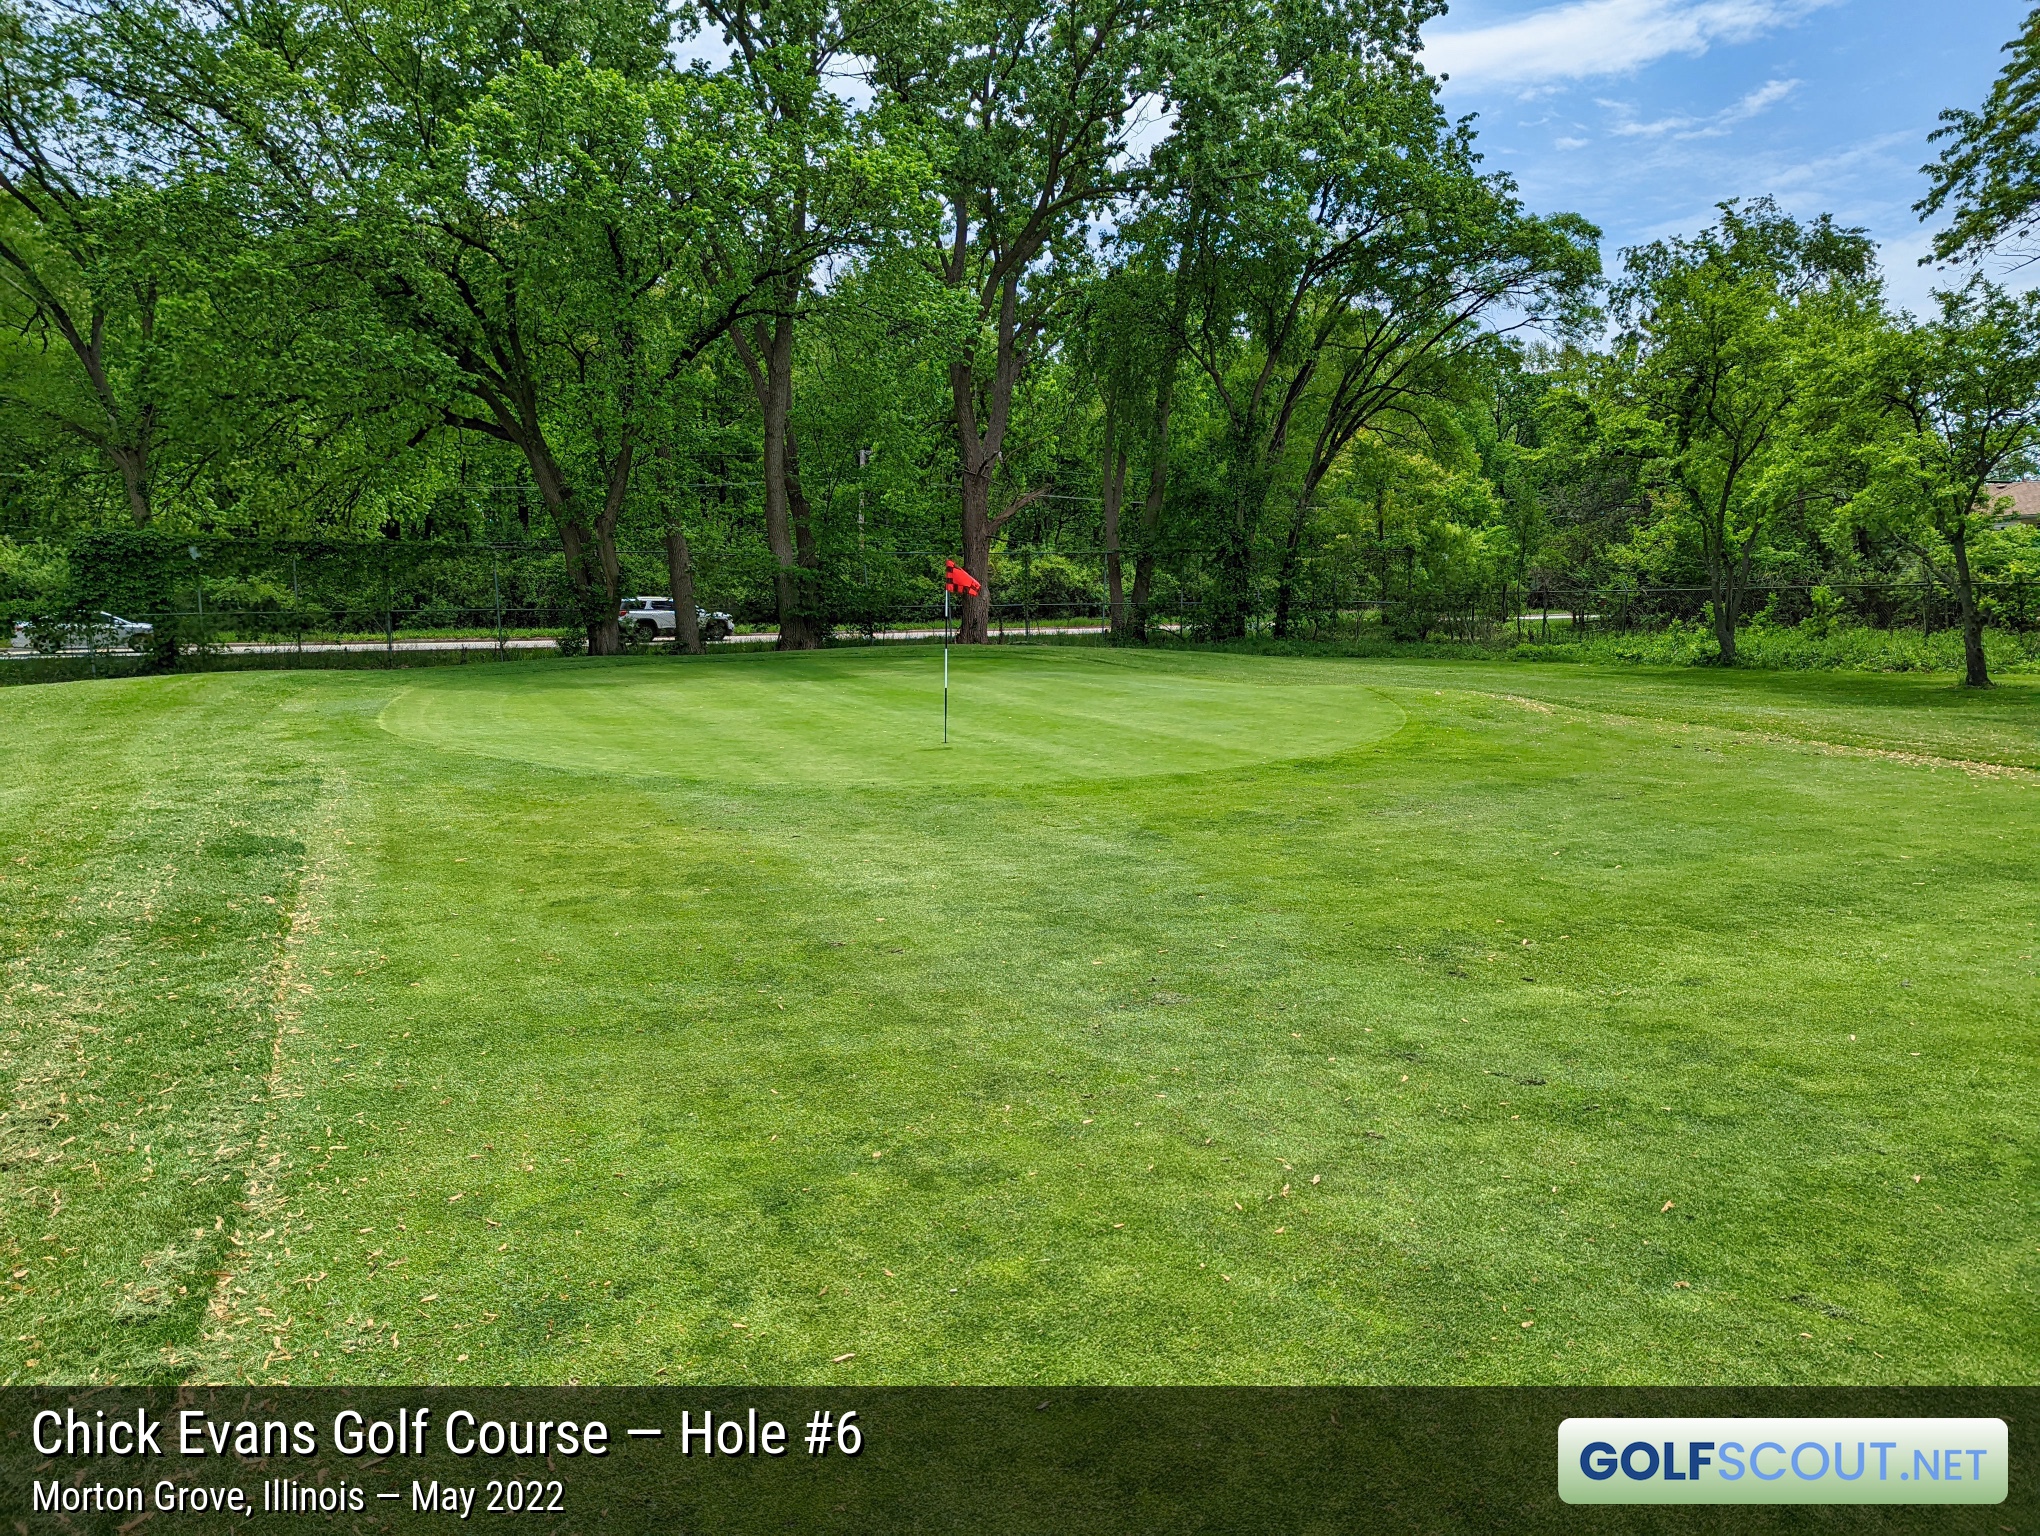 Photo of hole #6 at Chick Evans Golf Course in Morton Grove, Illinois. 